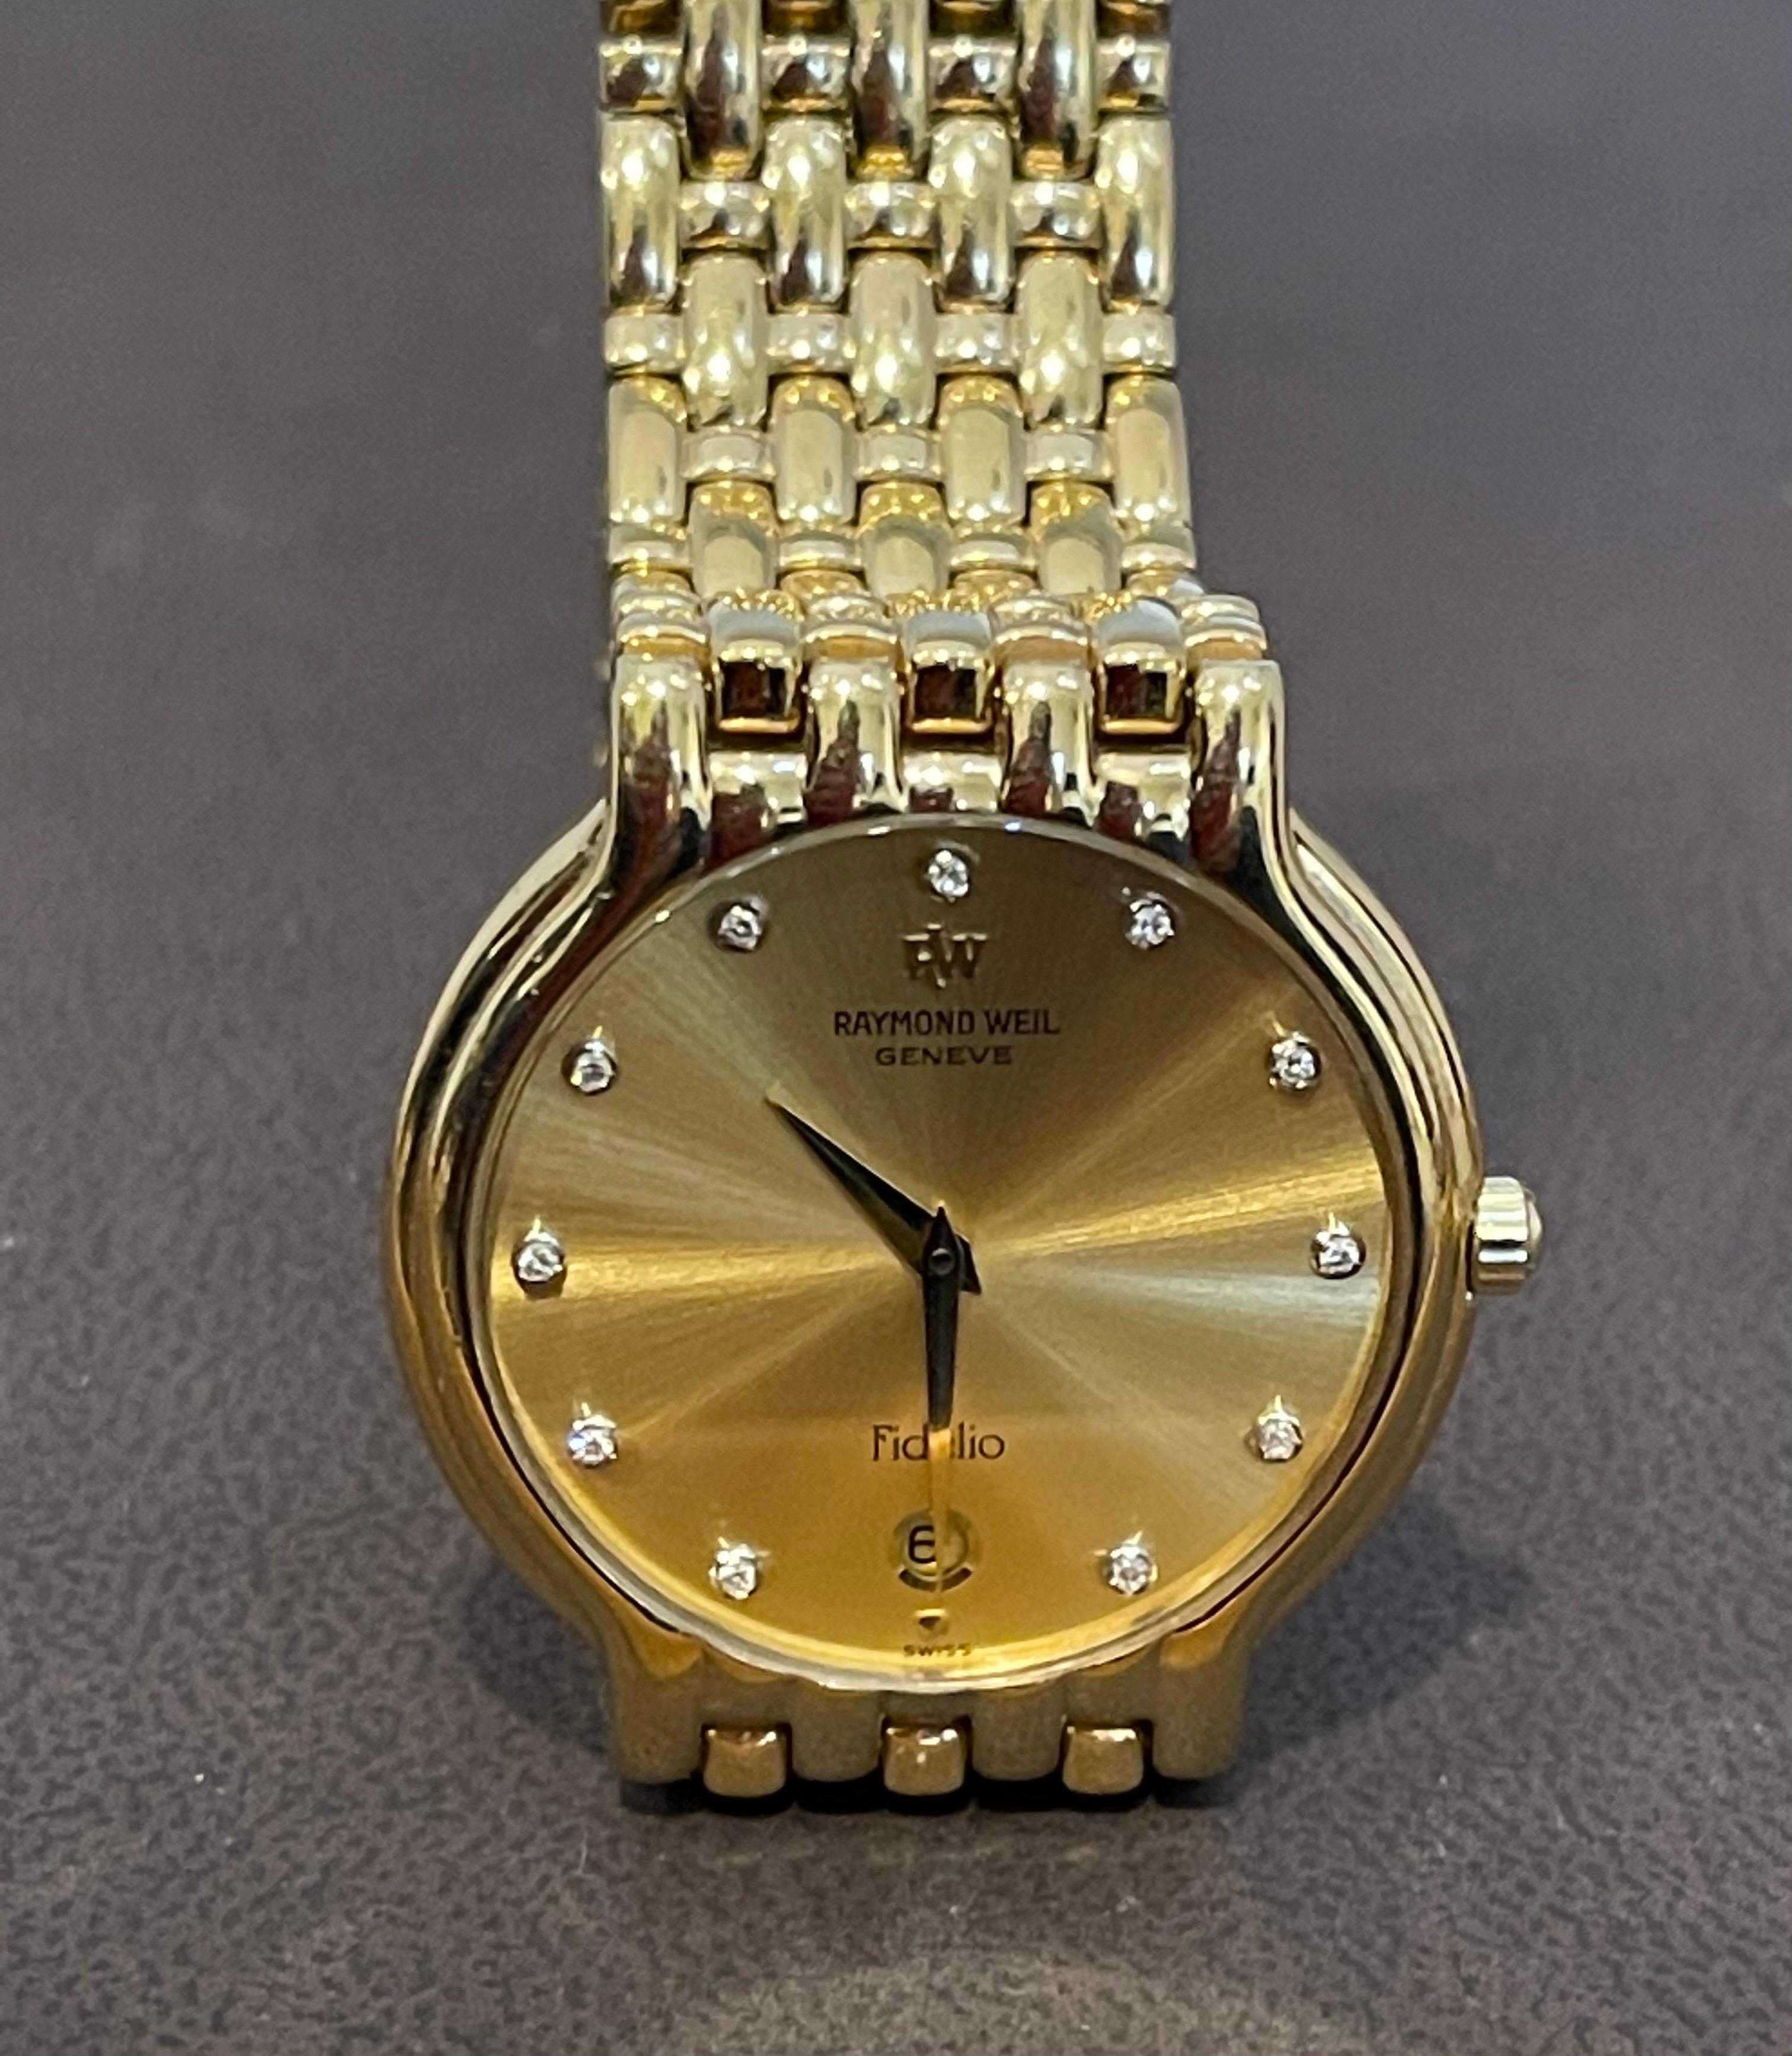 raymond weil 18k gold electroplated watch price